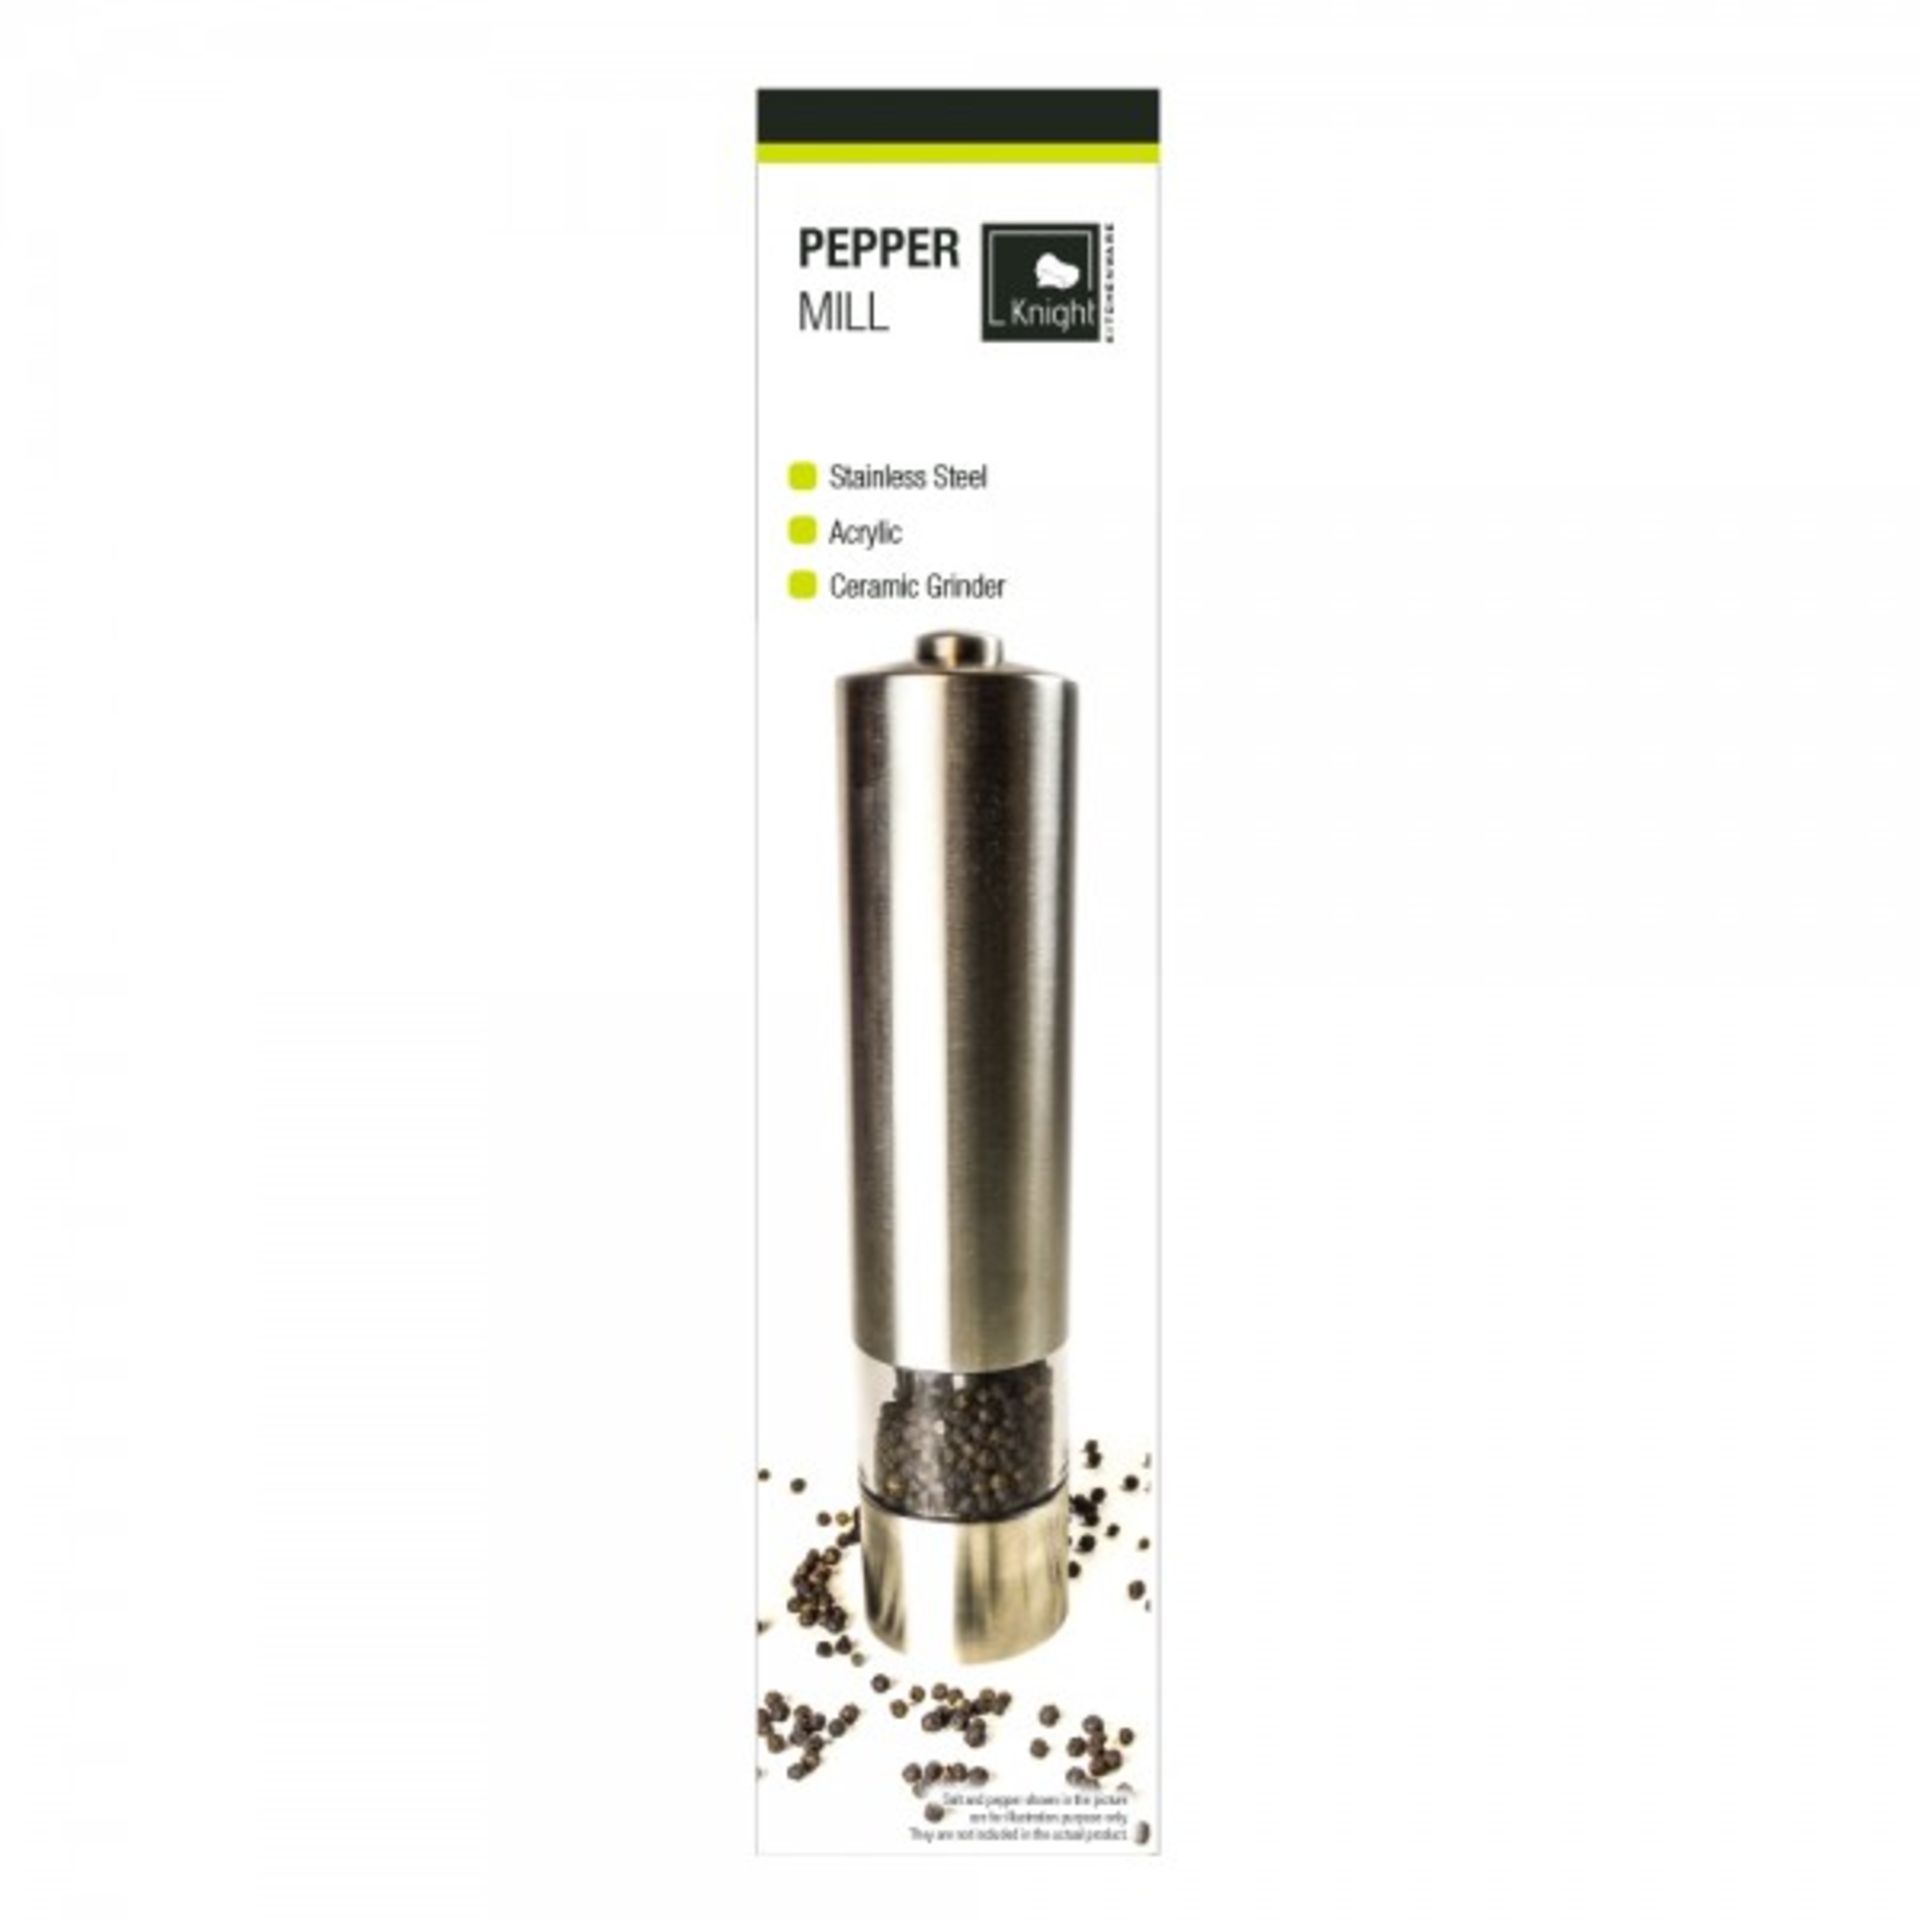 V Brand New Electric Stainless Steel Pepper Mill ISP £14.99 (Coopers Of Stortford)